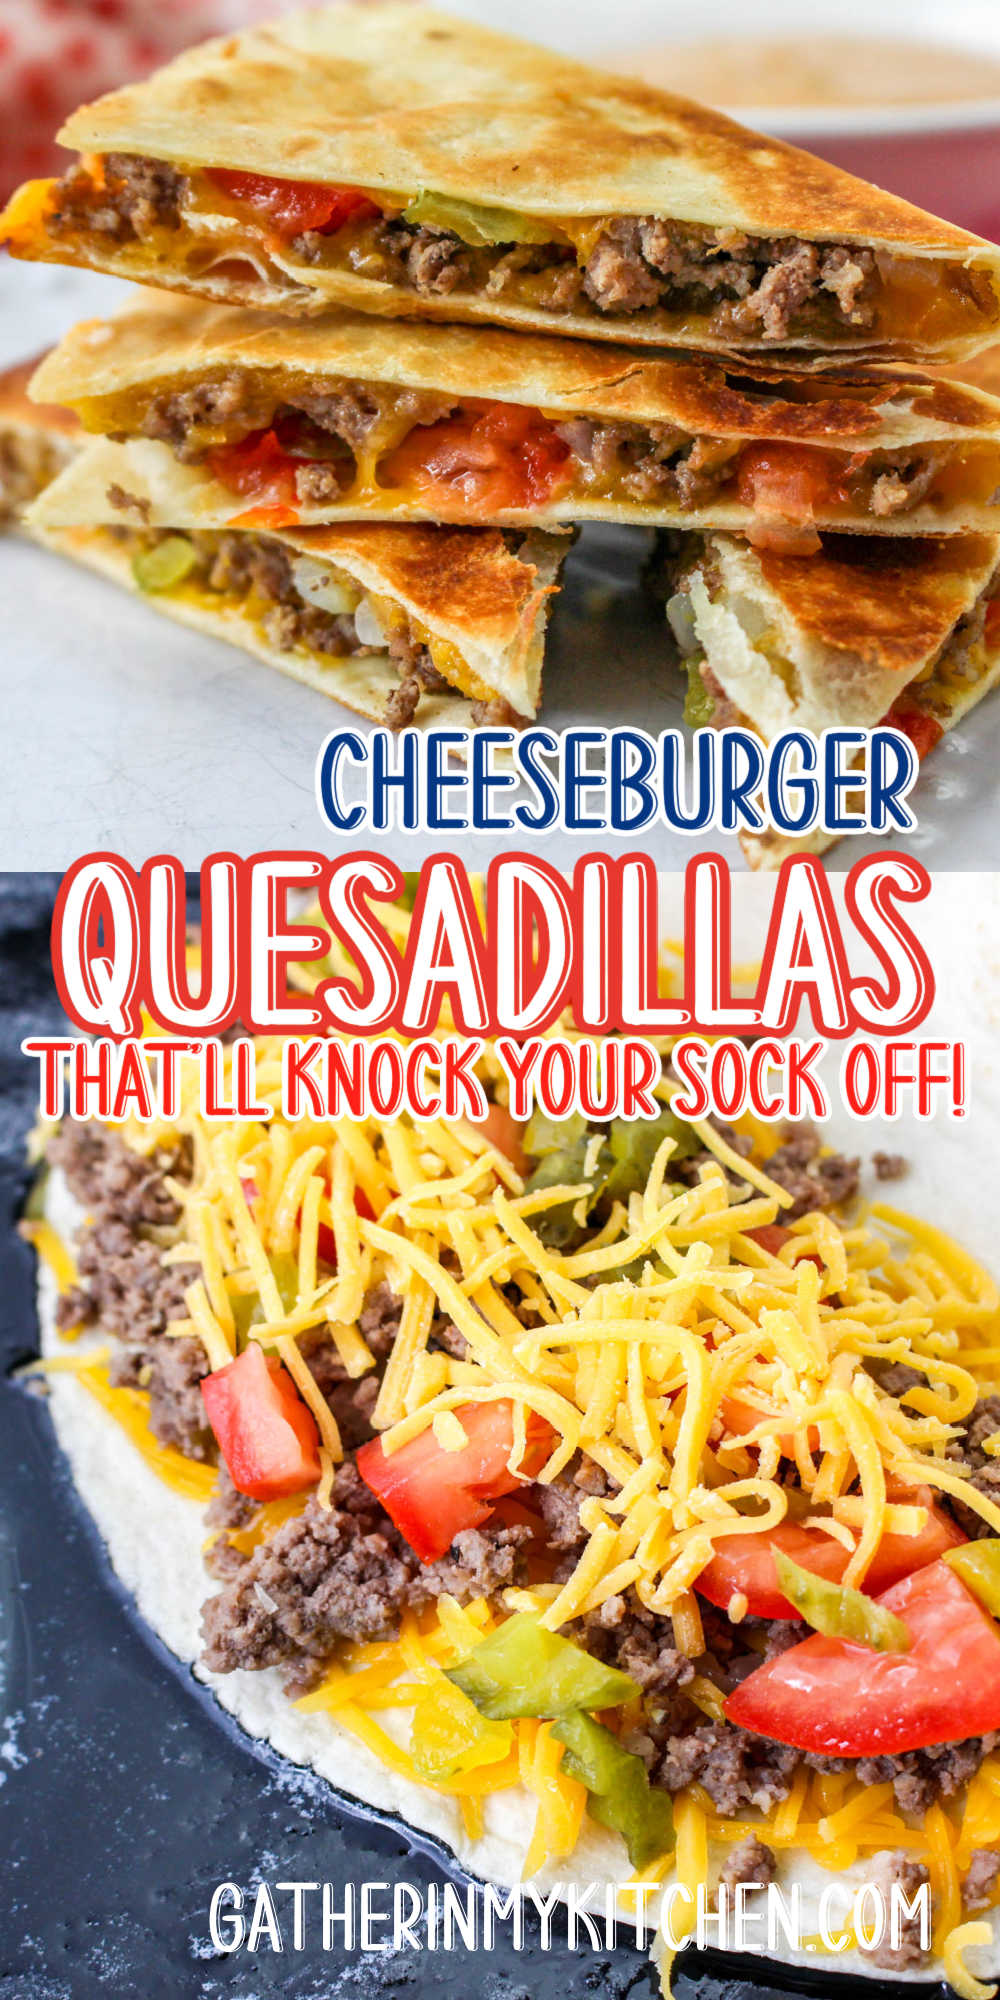 pin image: top is cheeseburger quesadillas on top of each other, the middle says "Cheeseburger Quesadillas That'll Knock Your Sock Off" and bottom is a an open faced quesadilla on a skillet.